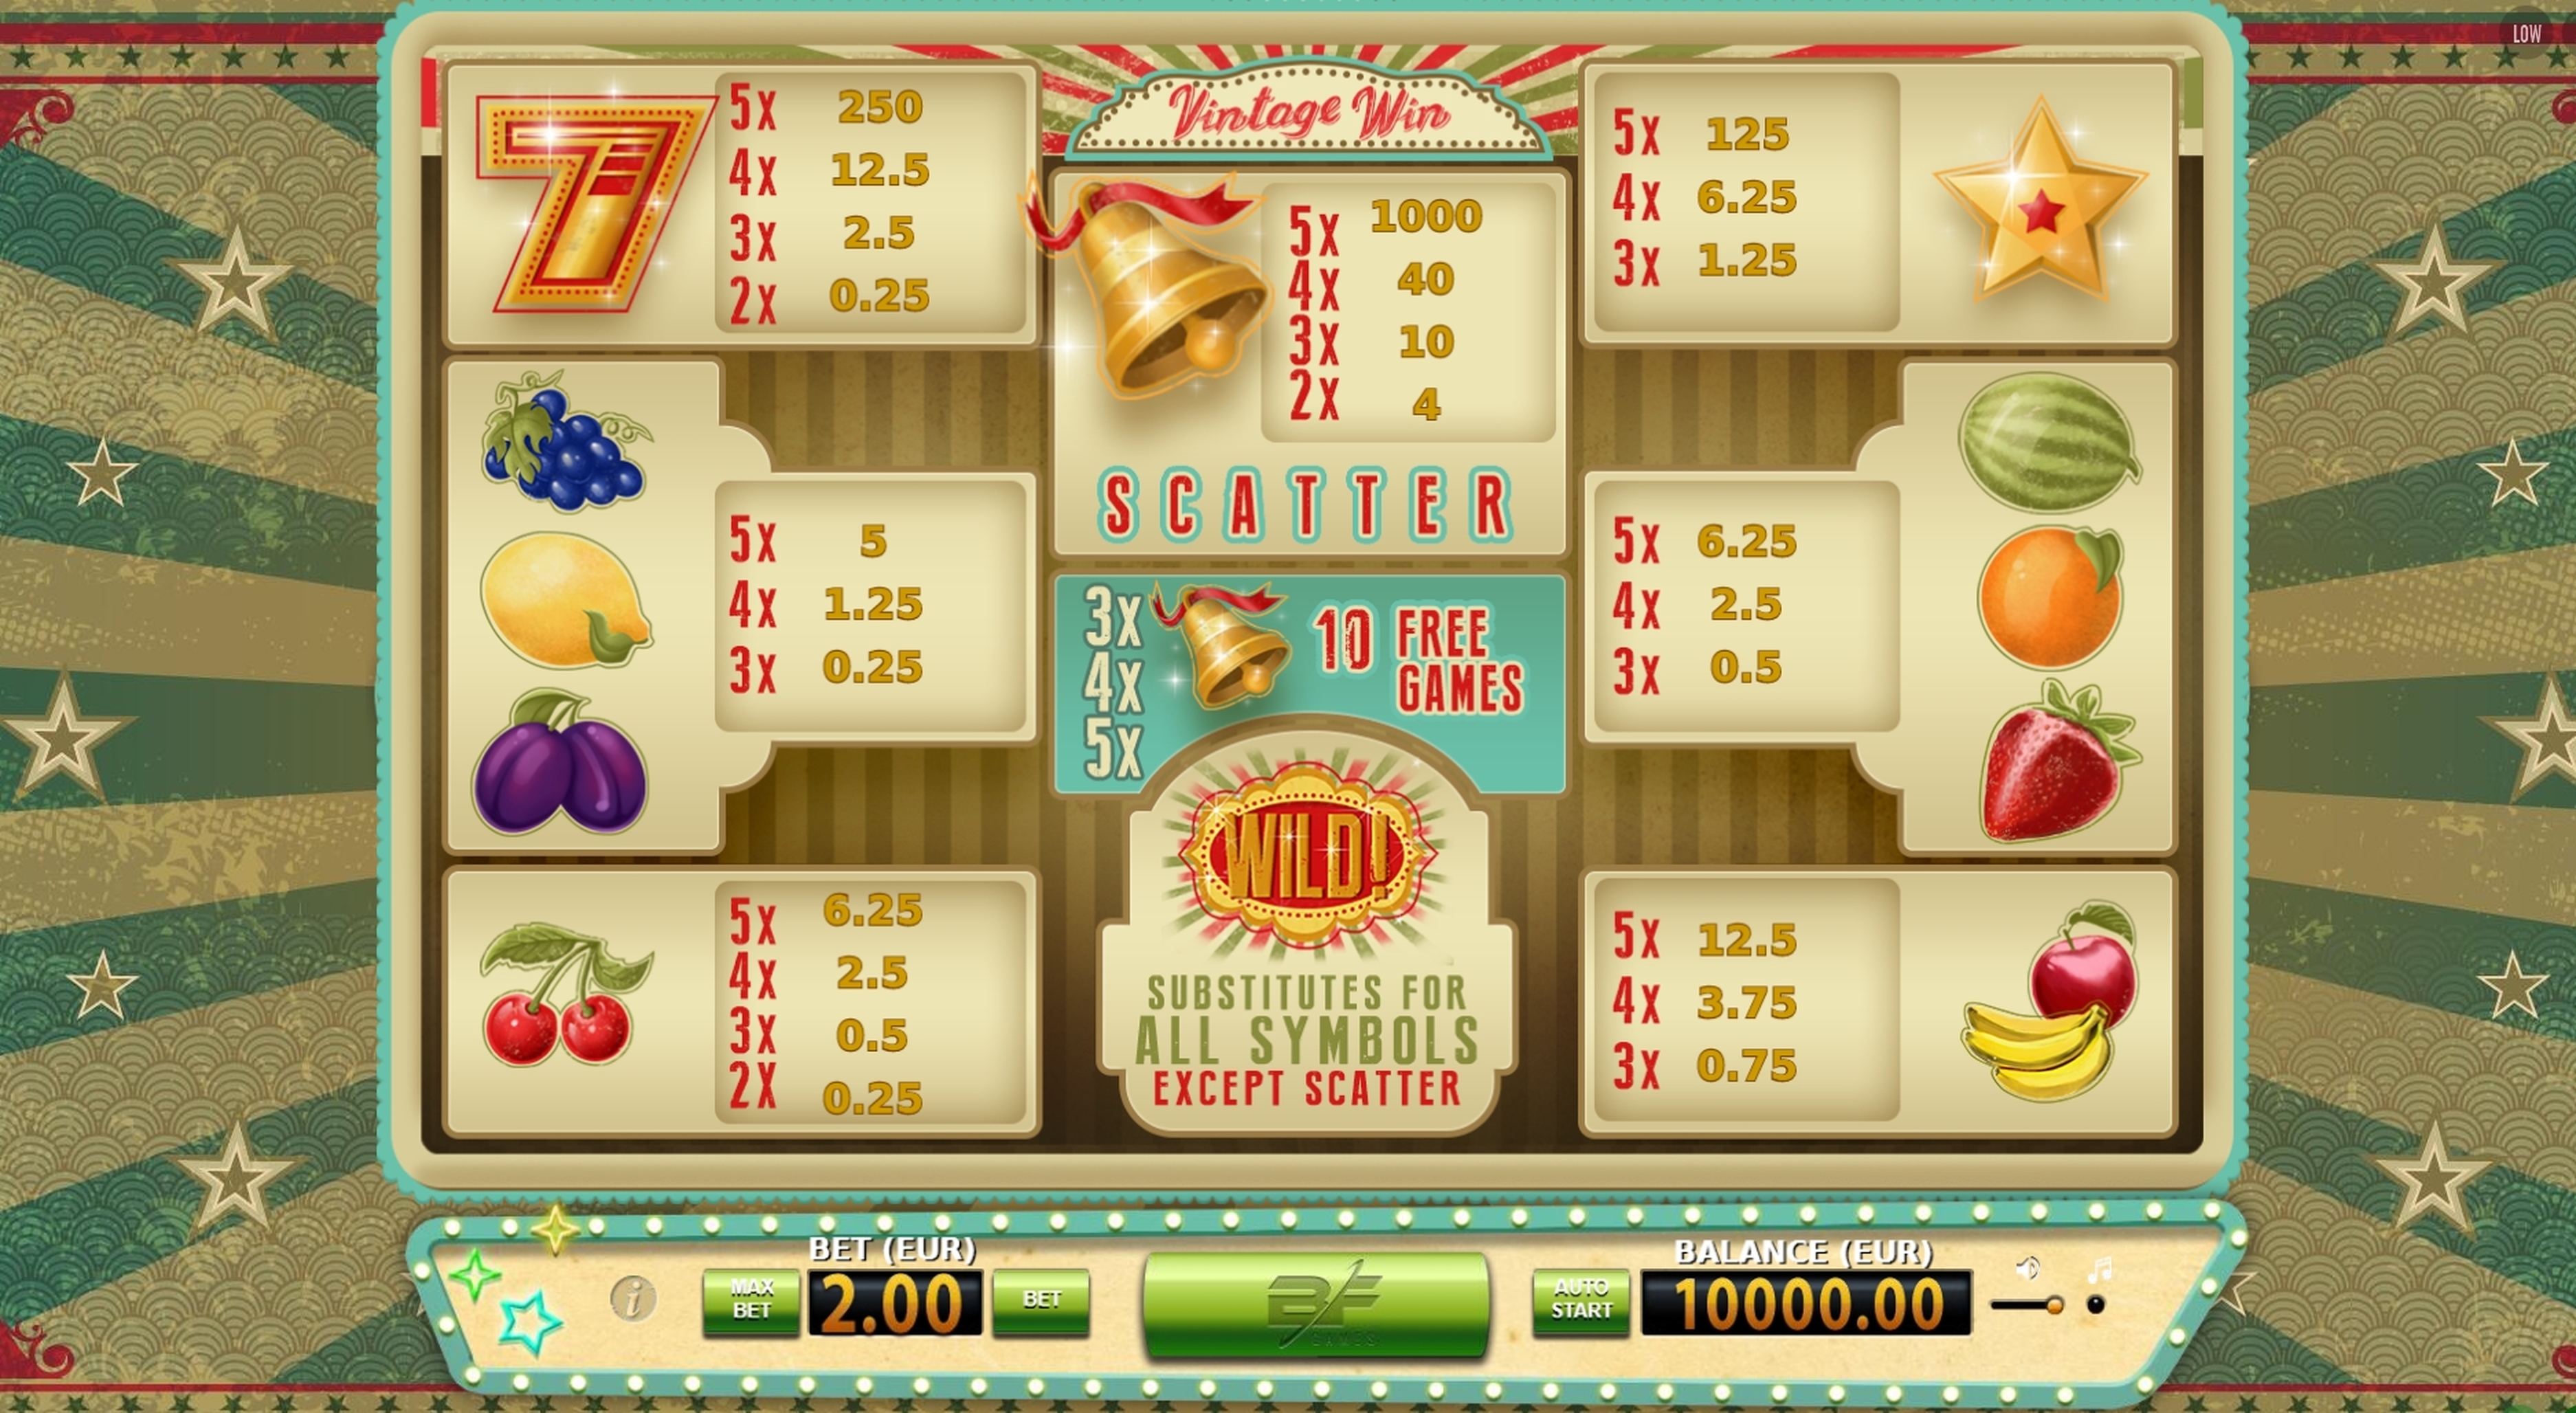 Info of Vintage Win Slot Game by BF Games